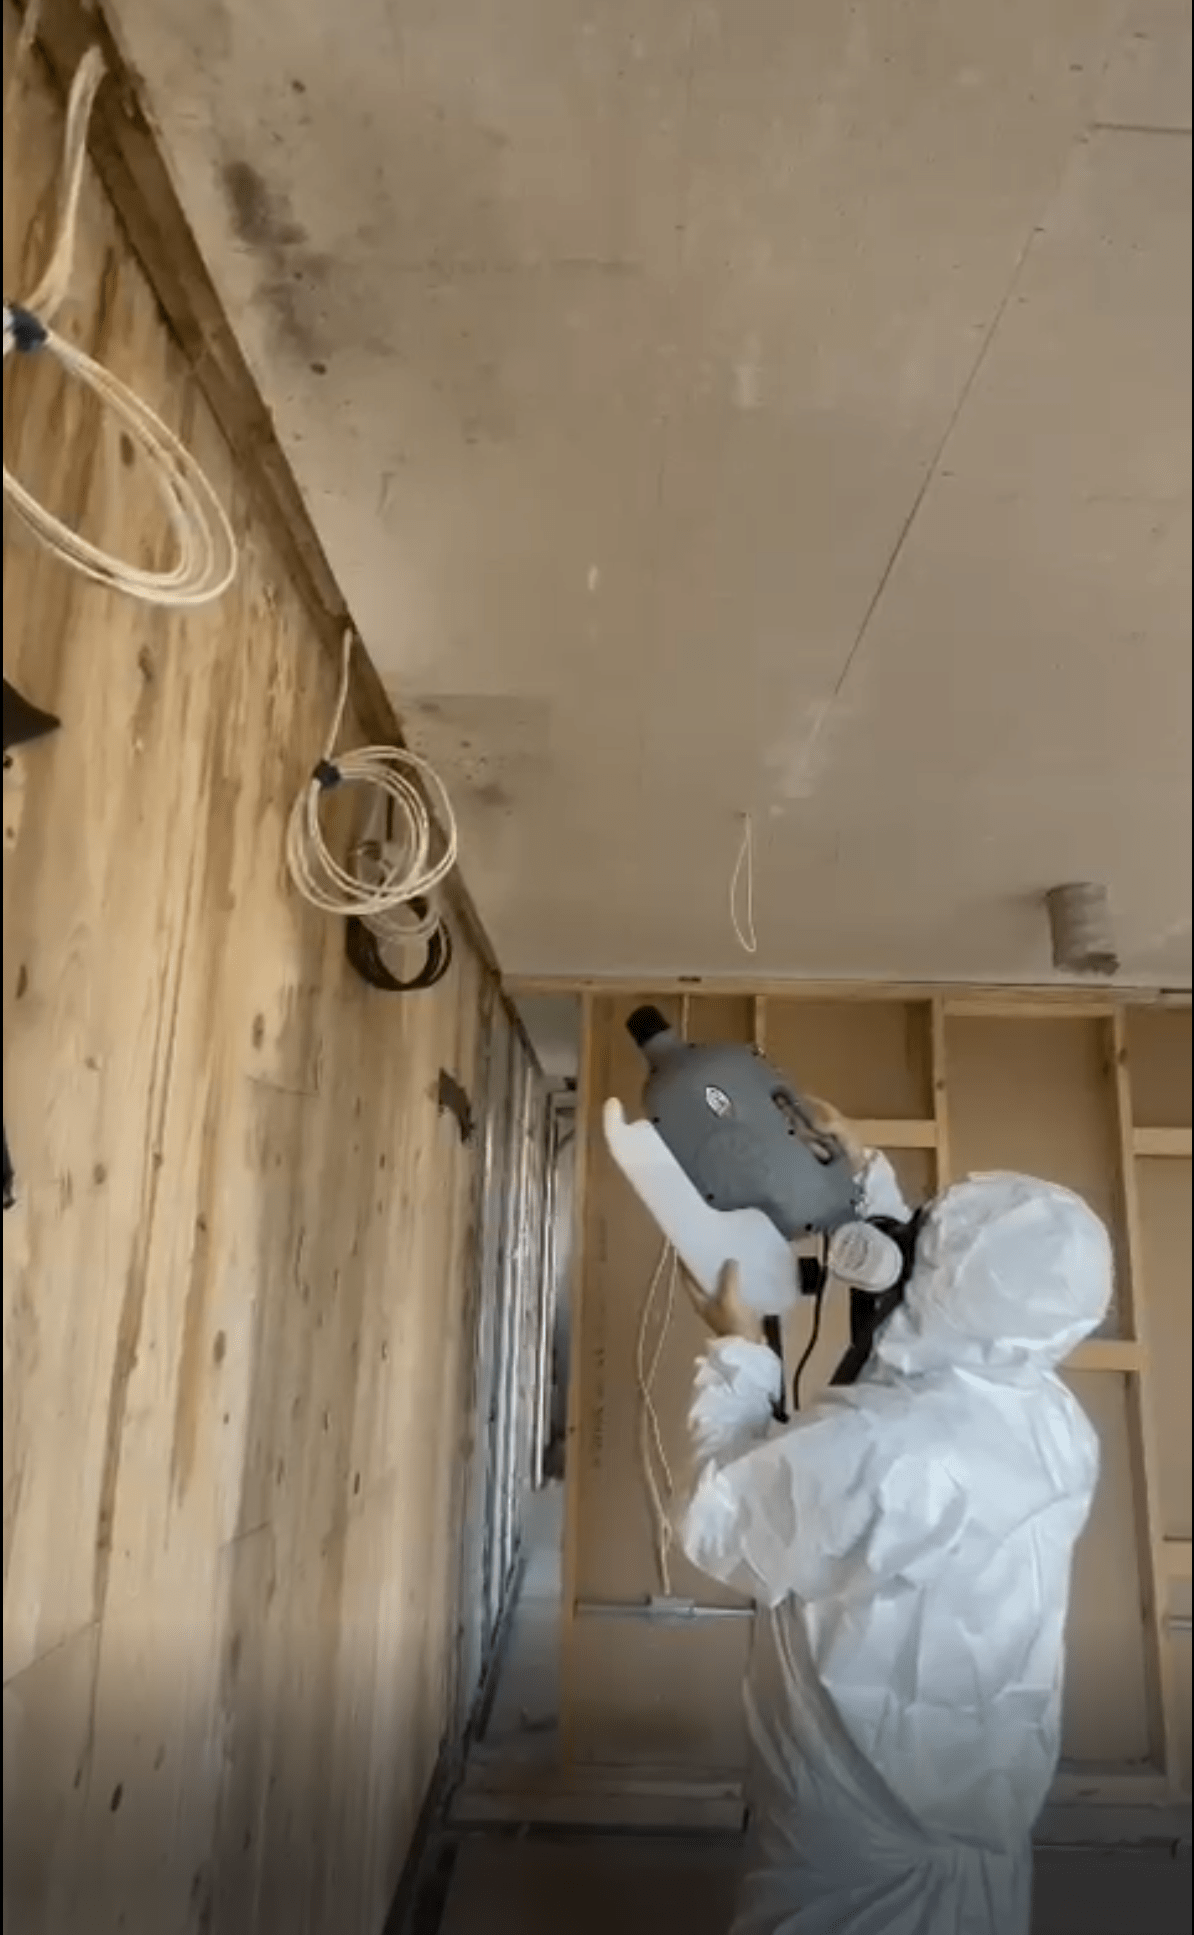 clad cleaning